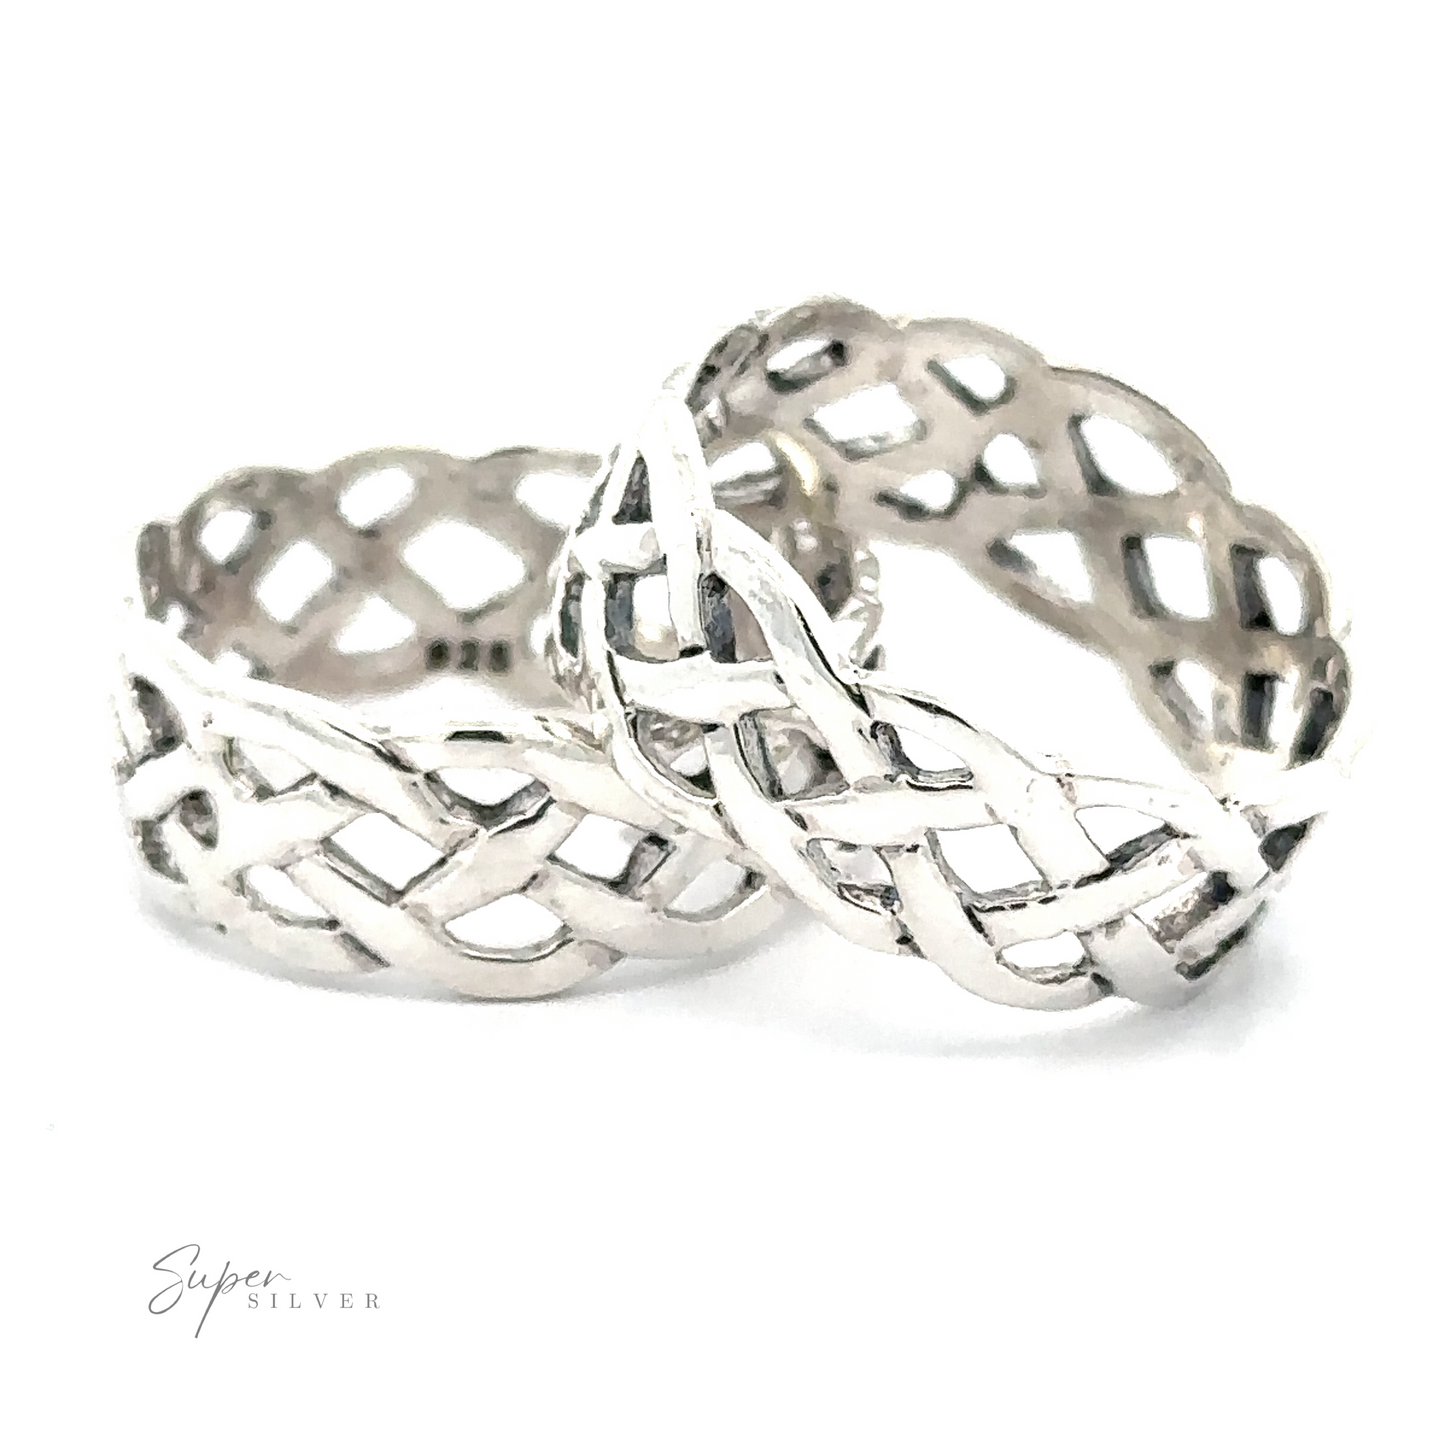 Two intertwined Wide Silver Woven Celtic Knot Bands with intricate openwork designs, displayed on a white background.